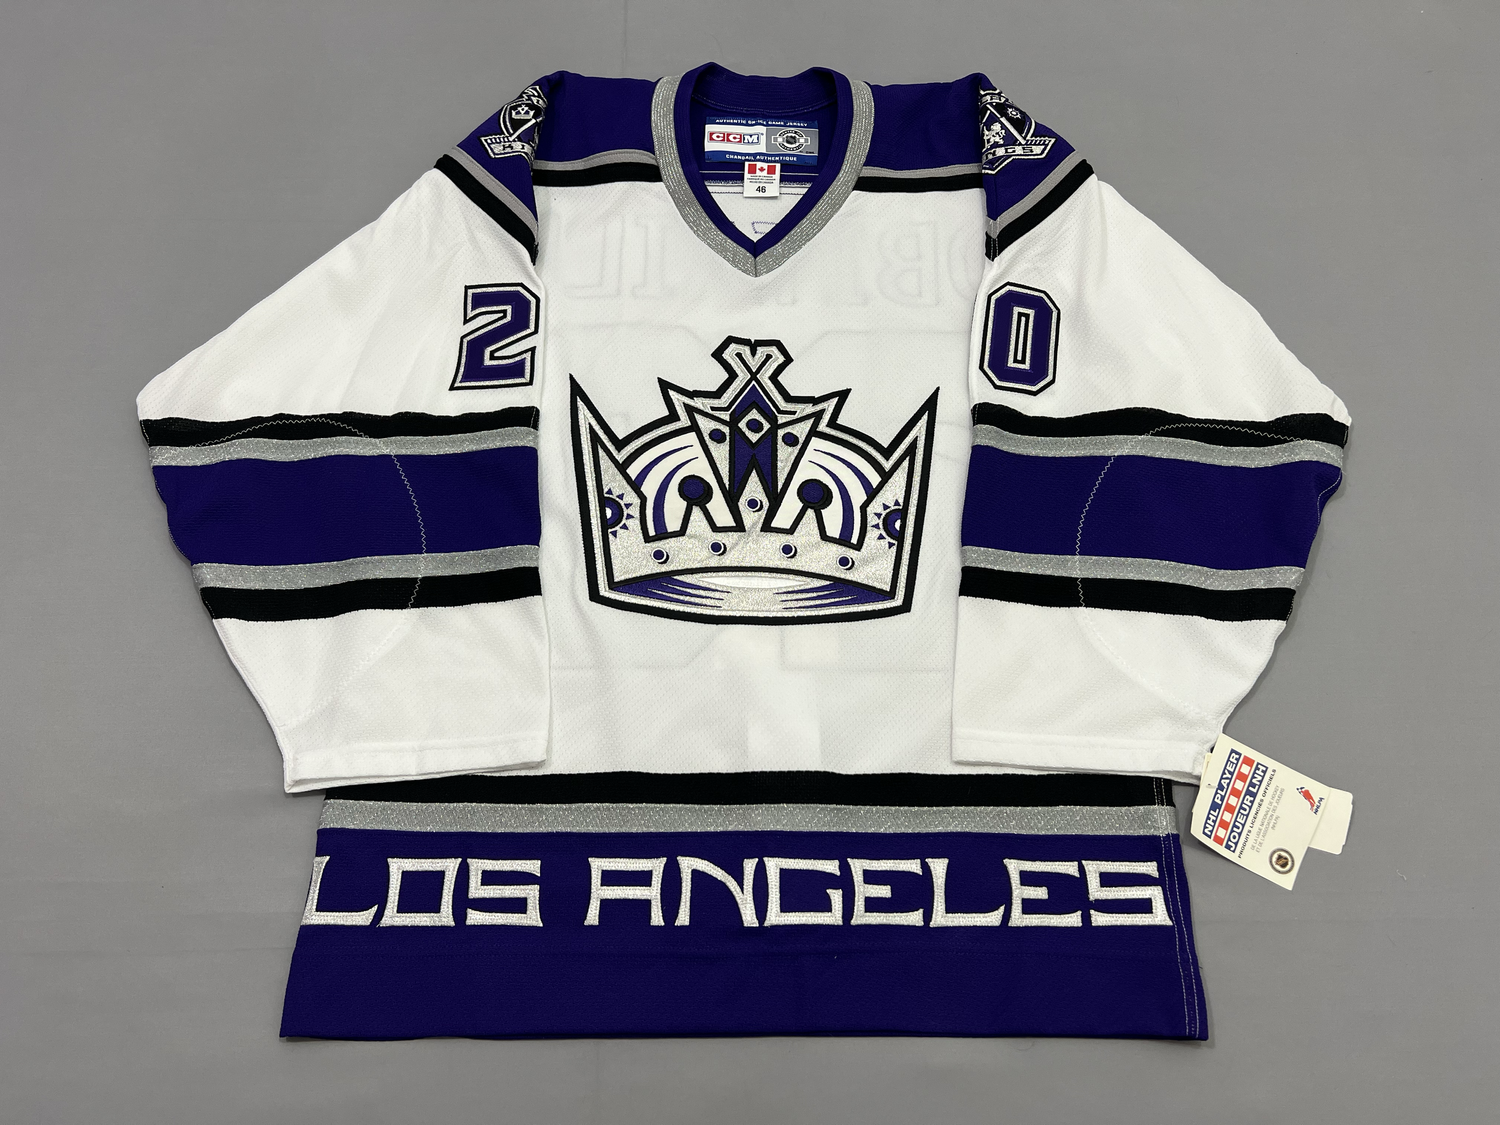 Mitchell & Ness Los Angeles Kings Luc Robitalle #20 '92 Blue Line Jersey, Men's, Large, Black